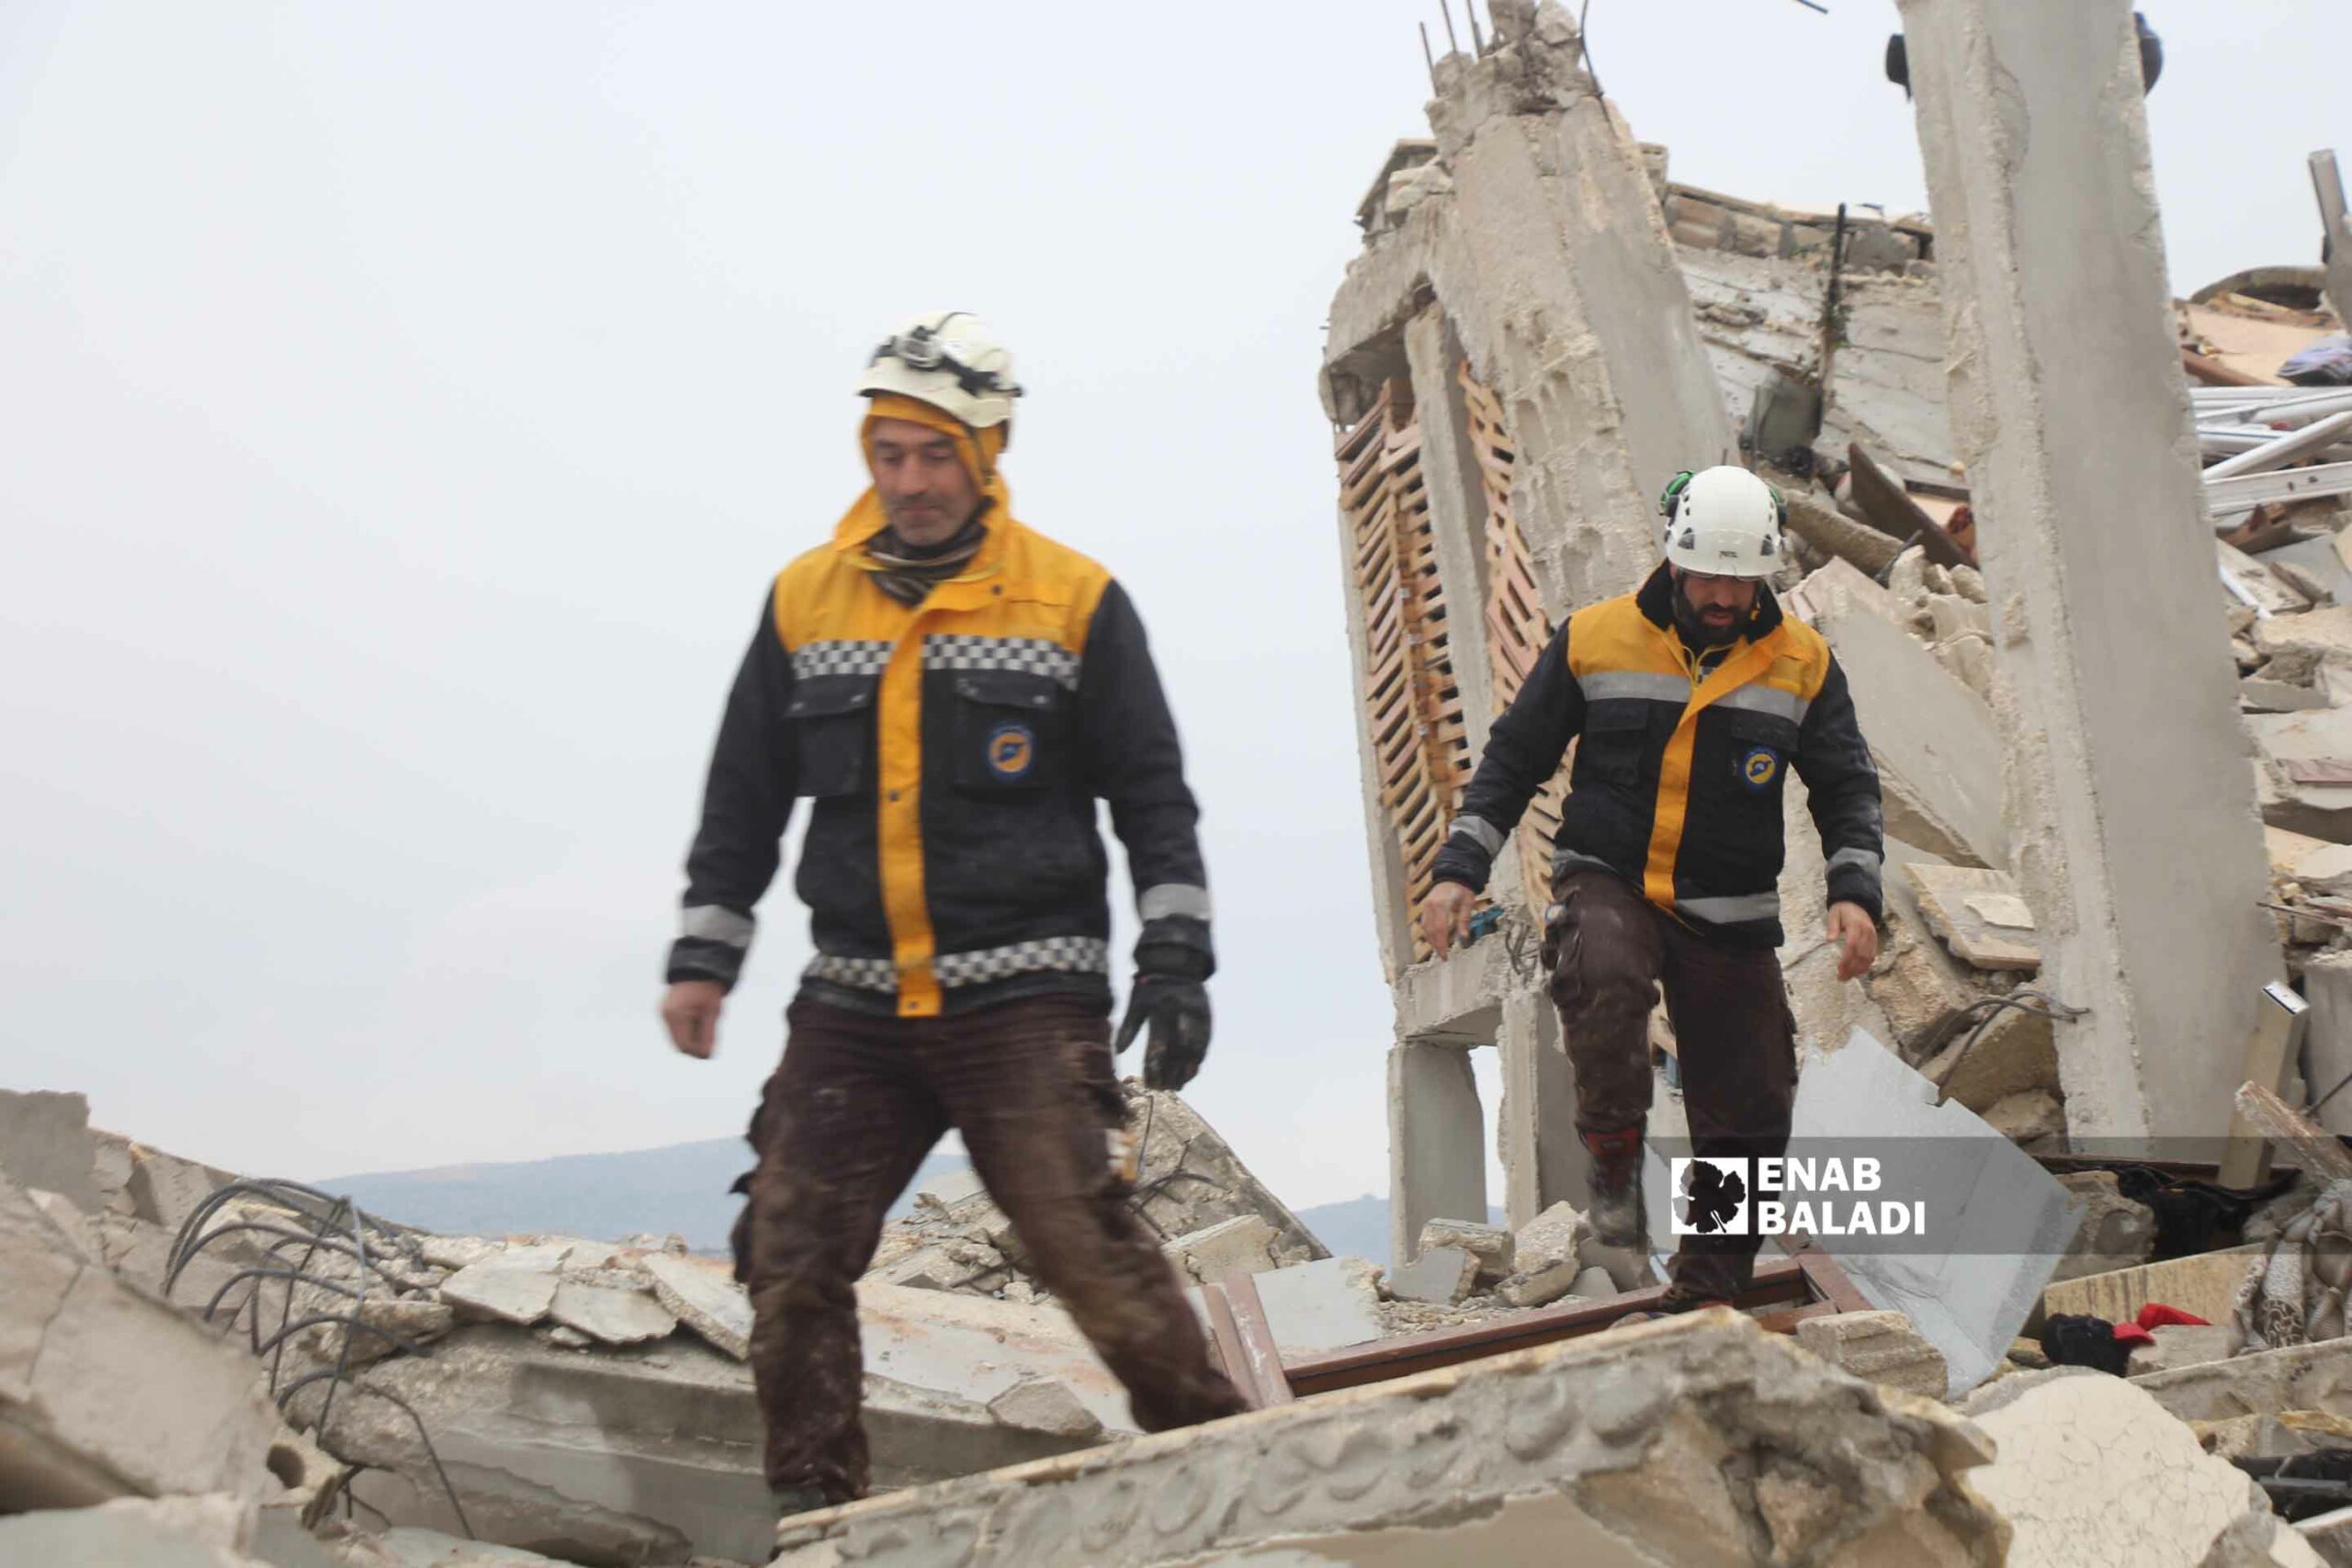 The Syrian Civil Defense (SCD) volunteers trying to rescue and extract victims from under the rubble in Sarmada, following an earthquake that struck northwestern Syria - February 6, 2023 (Enab Baladi/Iyad Abdul Jawad)